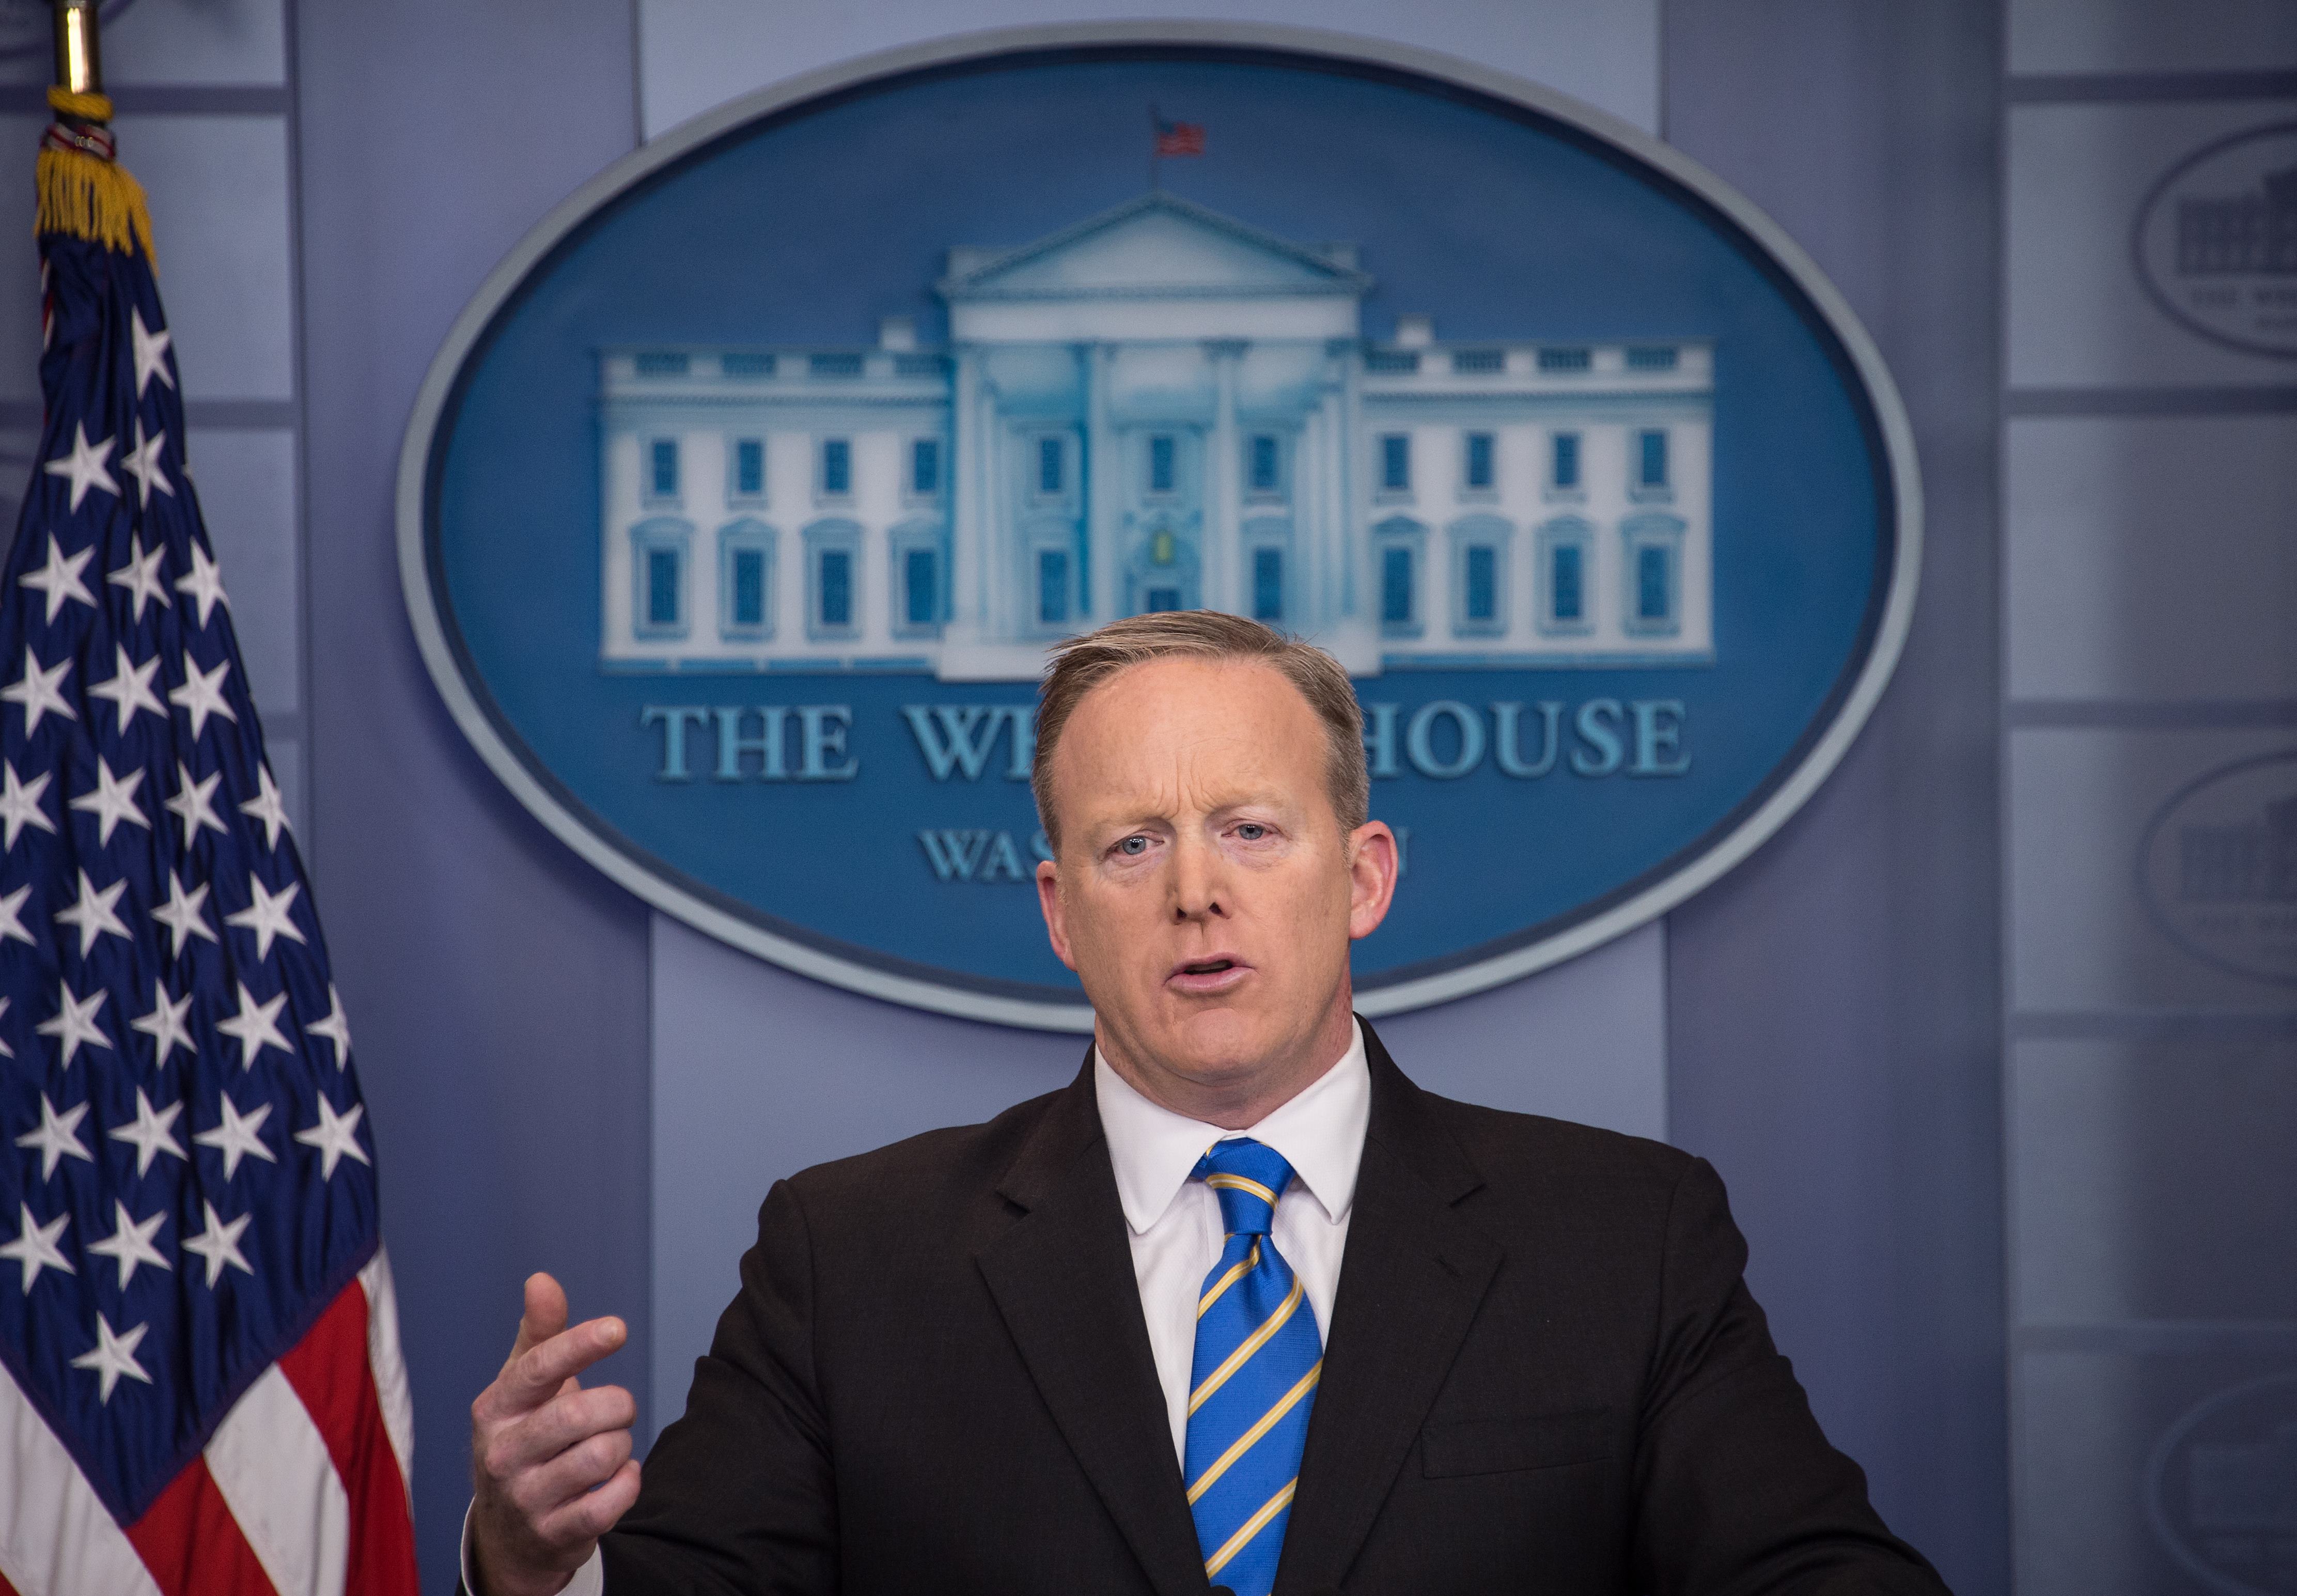 White House spokesman Sean Spicer speaks at the daily press briefing at the White House in Washington, DC, on January 24, 2017. / AFP PHOTO / NICHOLAS KAMM